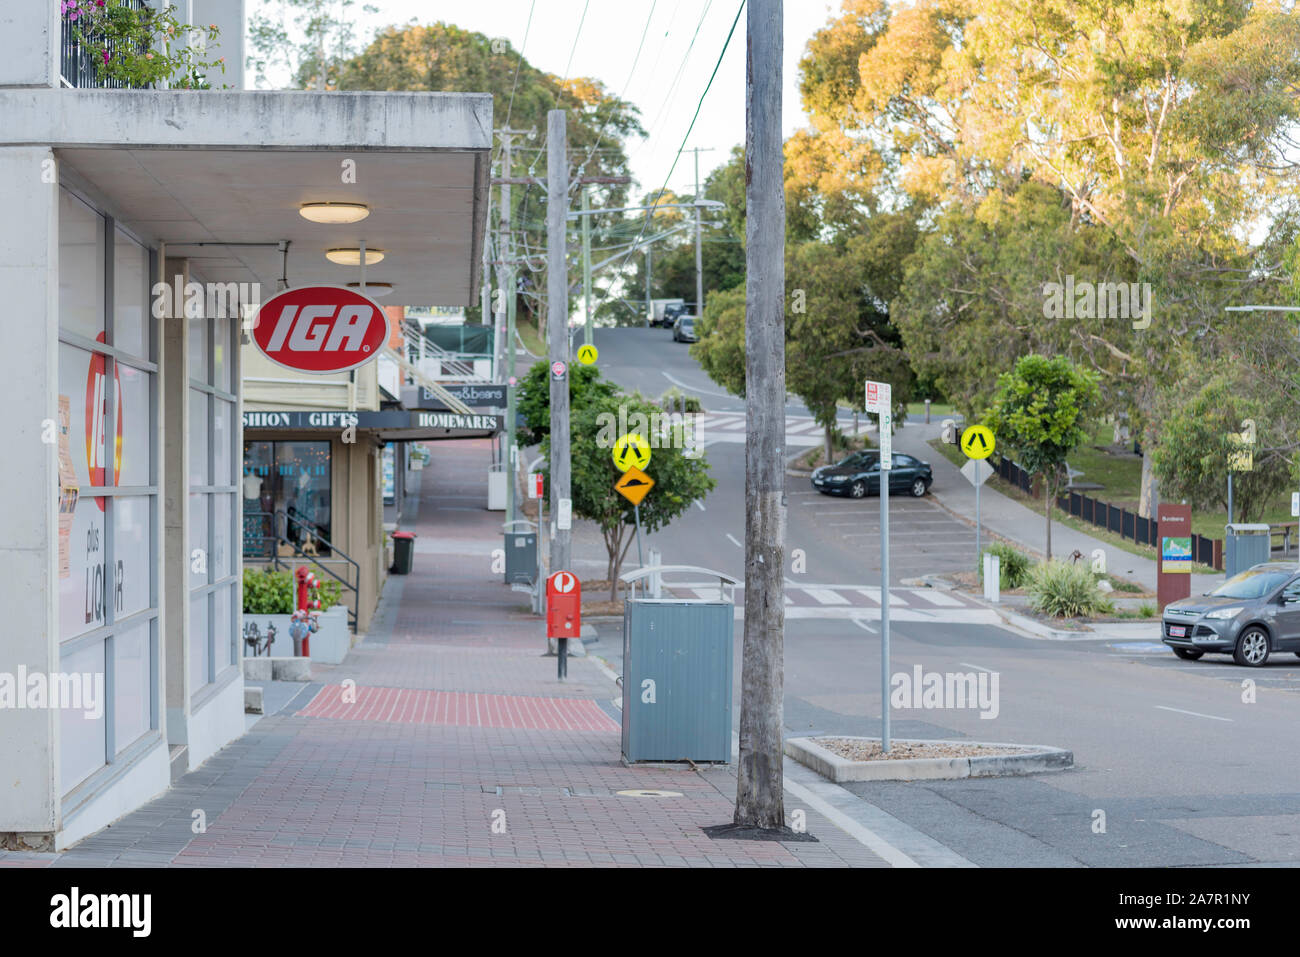 Early morning and the main shopping strip in Brighton Street Bundeena is empty of people, soon though the coffee shop will open and a crowd will form. Stock Photo